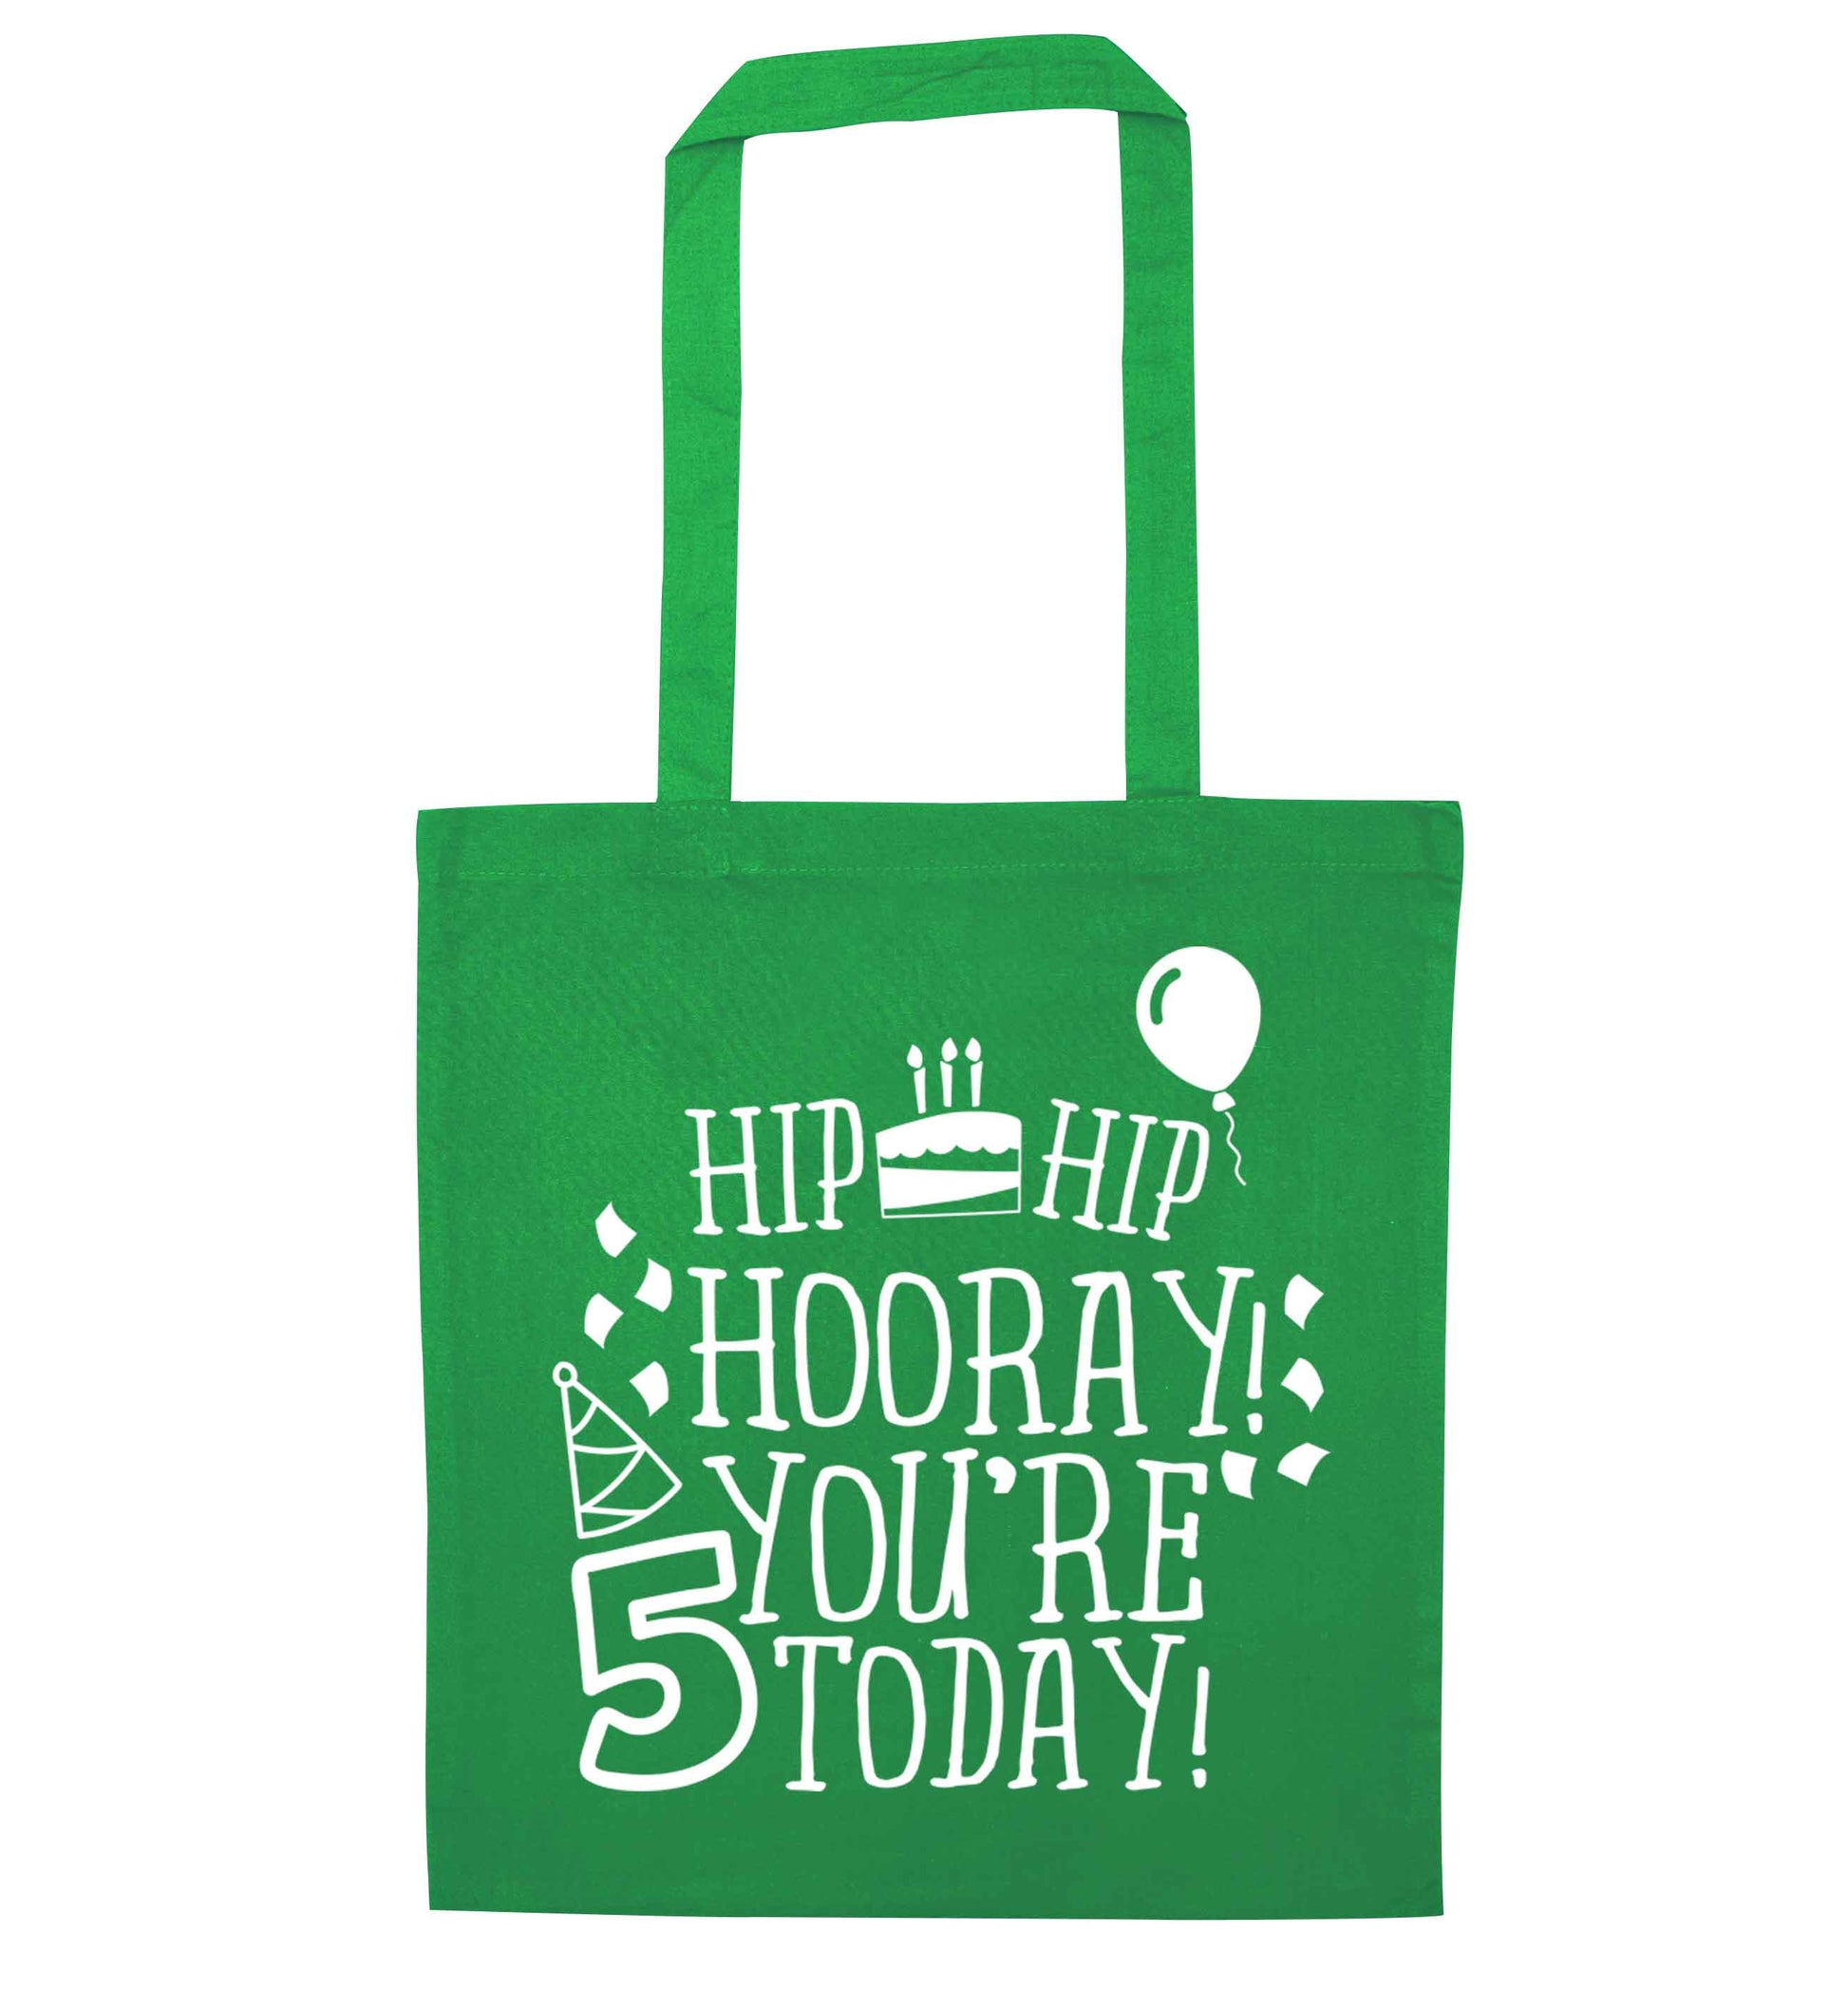 Hip hip hooray you're five today! green tote bag